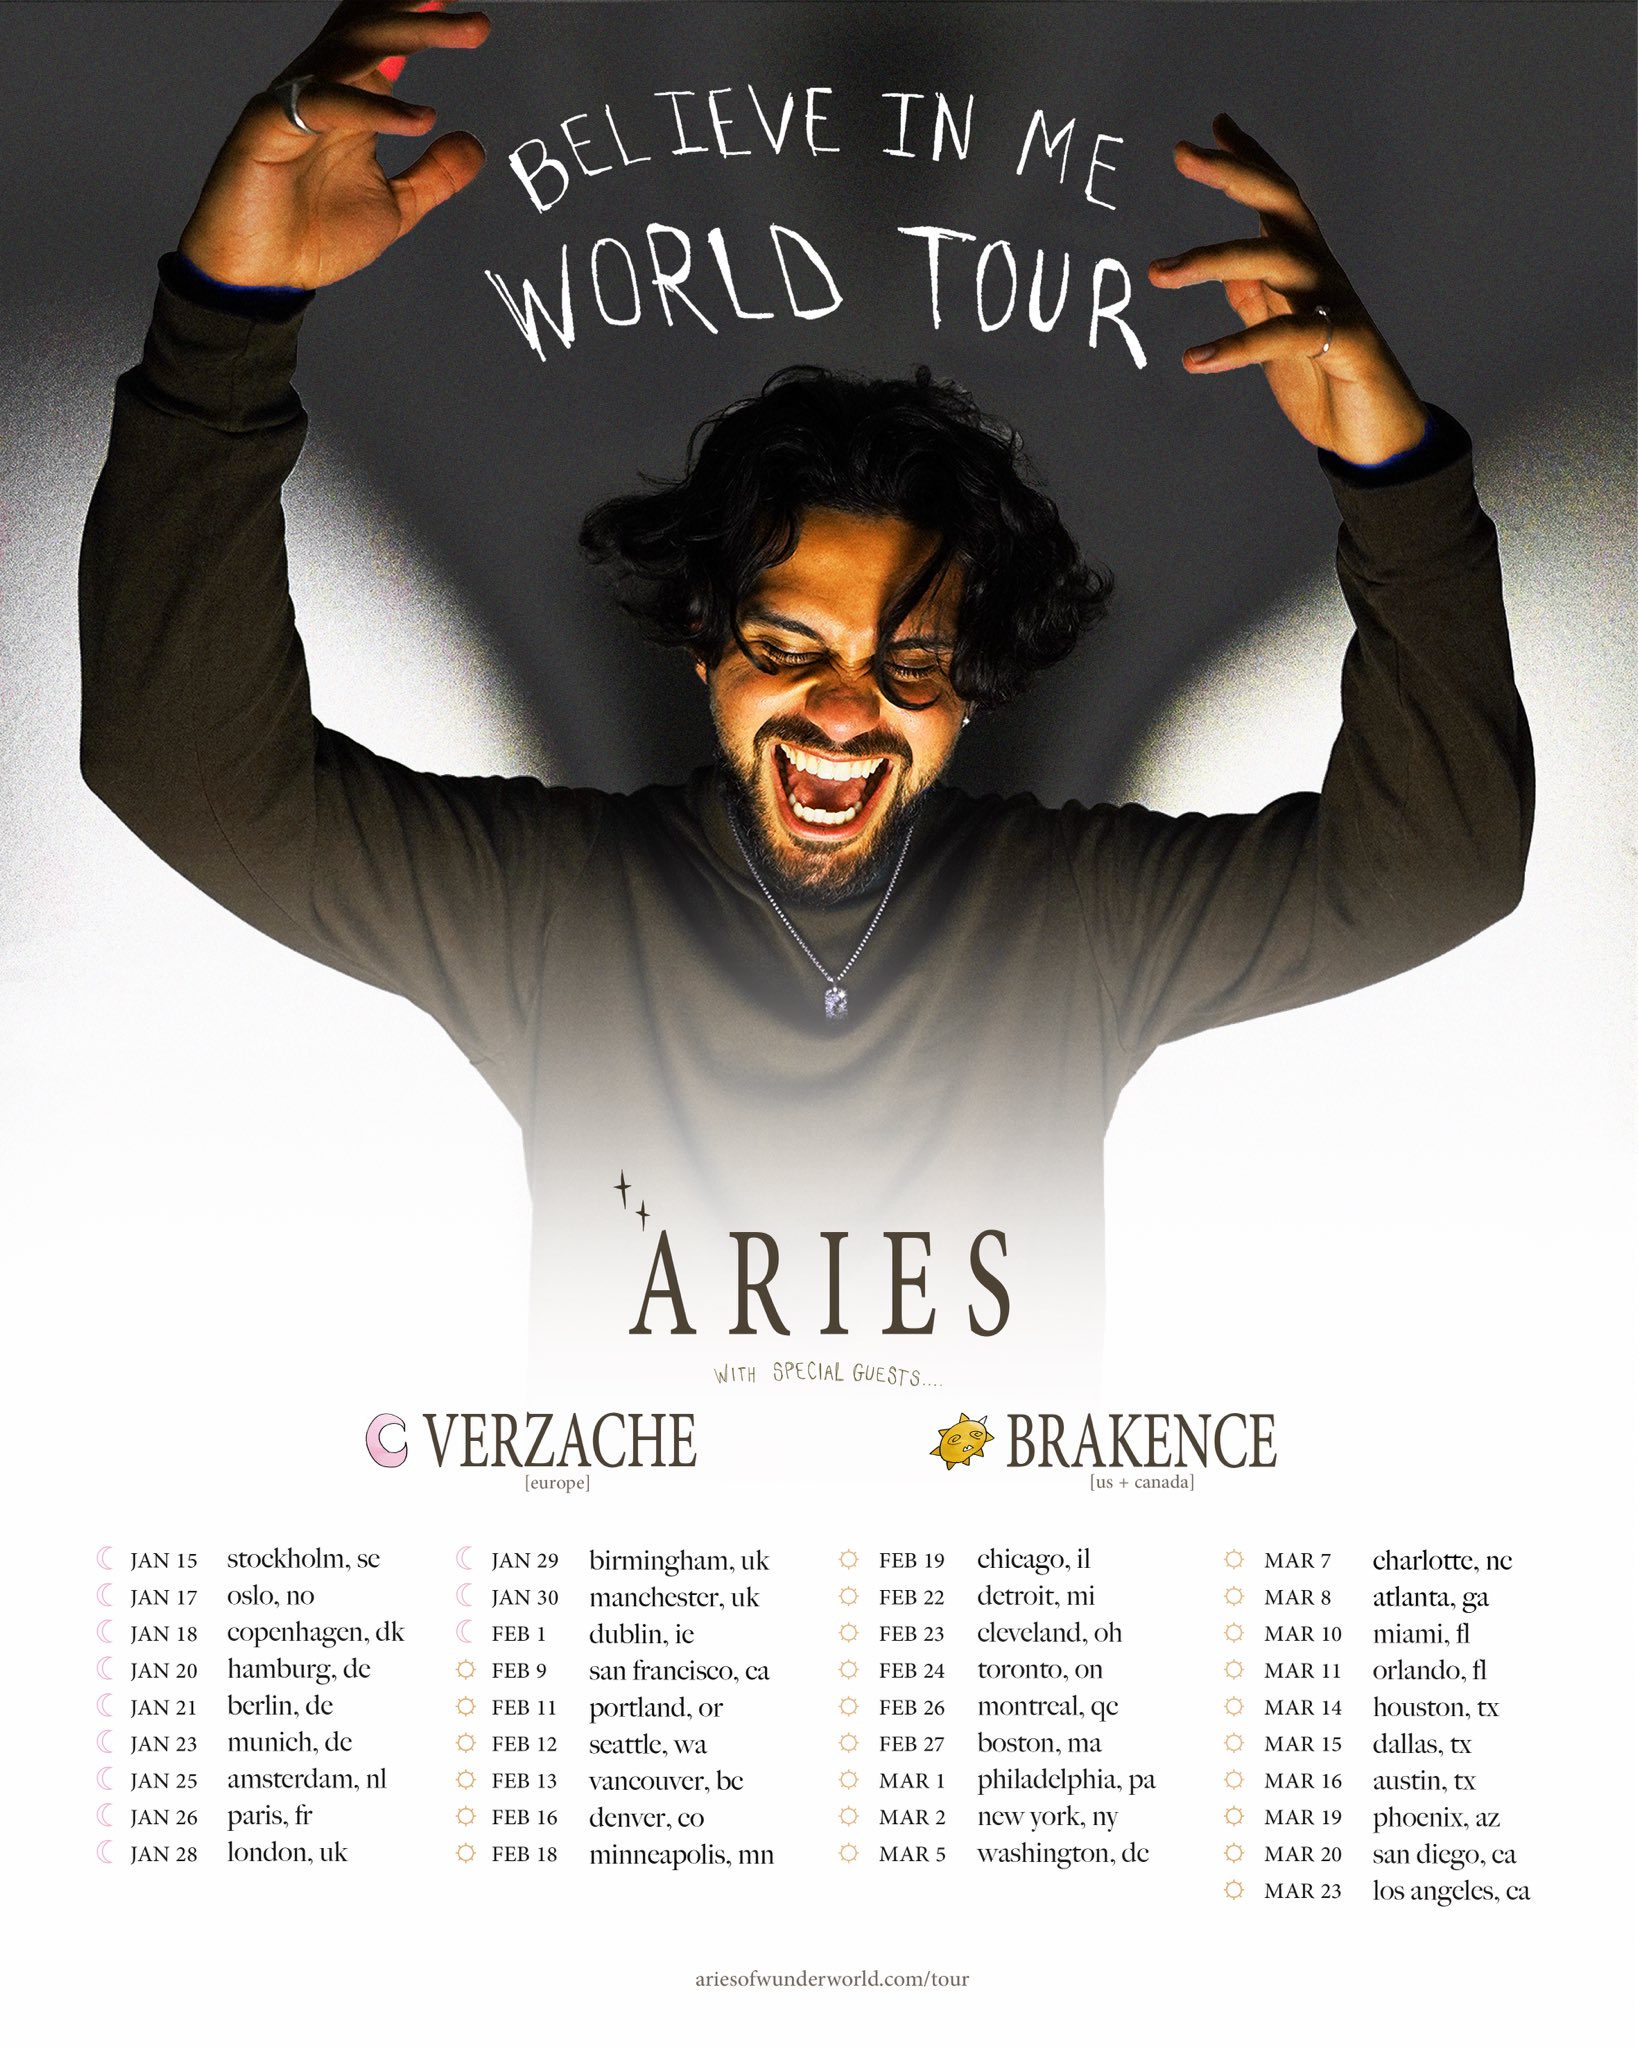 Aries on Twitter: "BELIEVE IN ME WORLD TOUR presale tix tmr at 10am ur local time password is journey2thesun general on-sale friday at 10am local time https://t.co/nx57IxZ9nx https://t.co/ZIcNDvSCiT" / Twitter